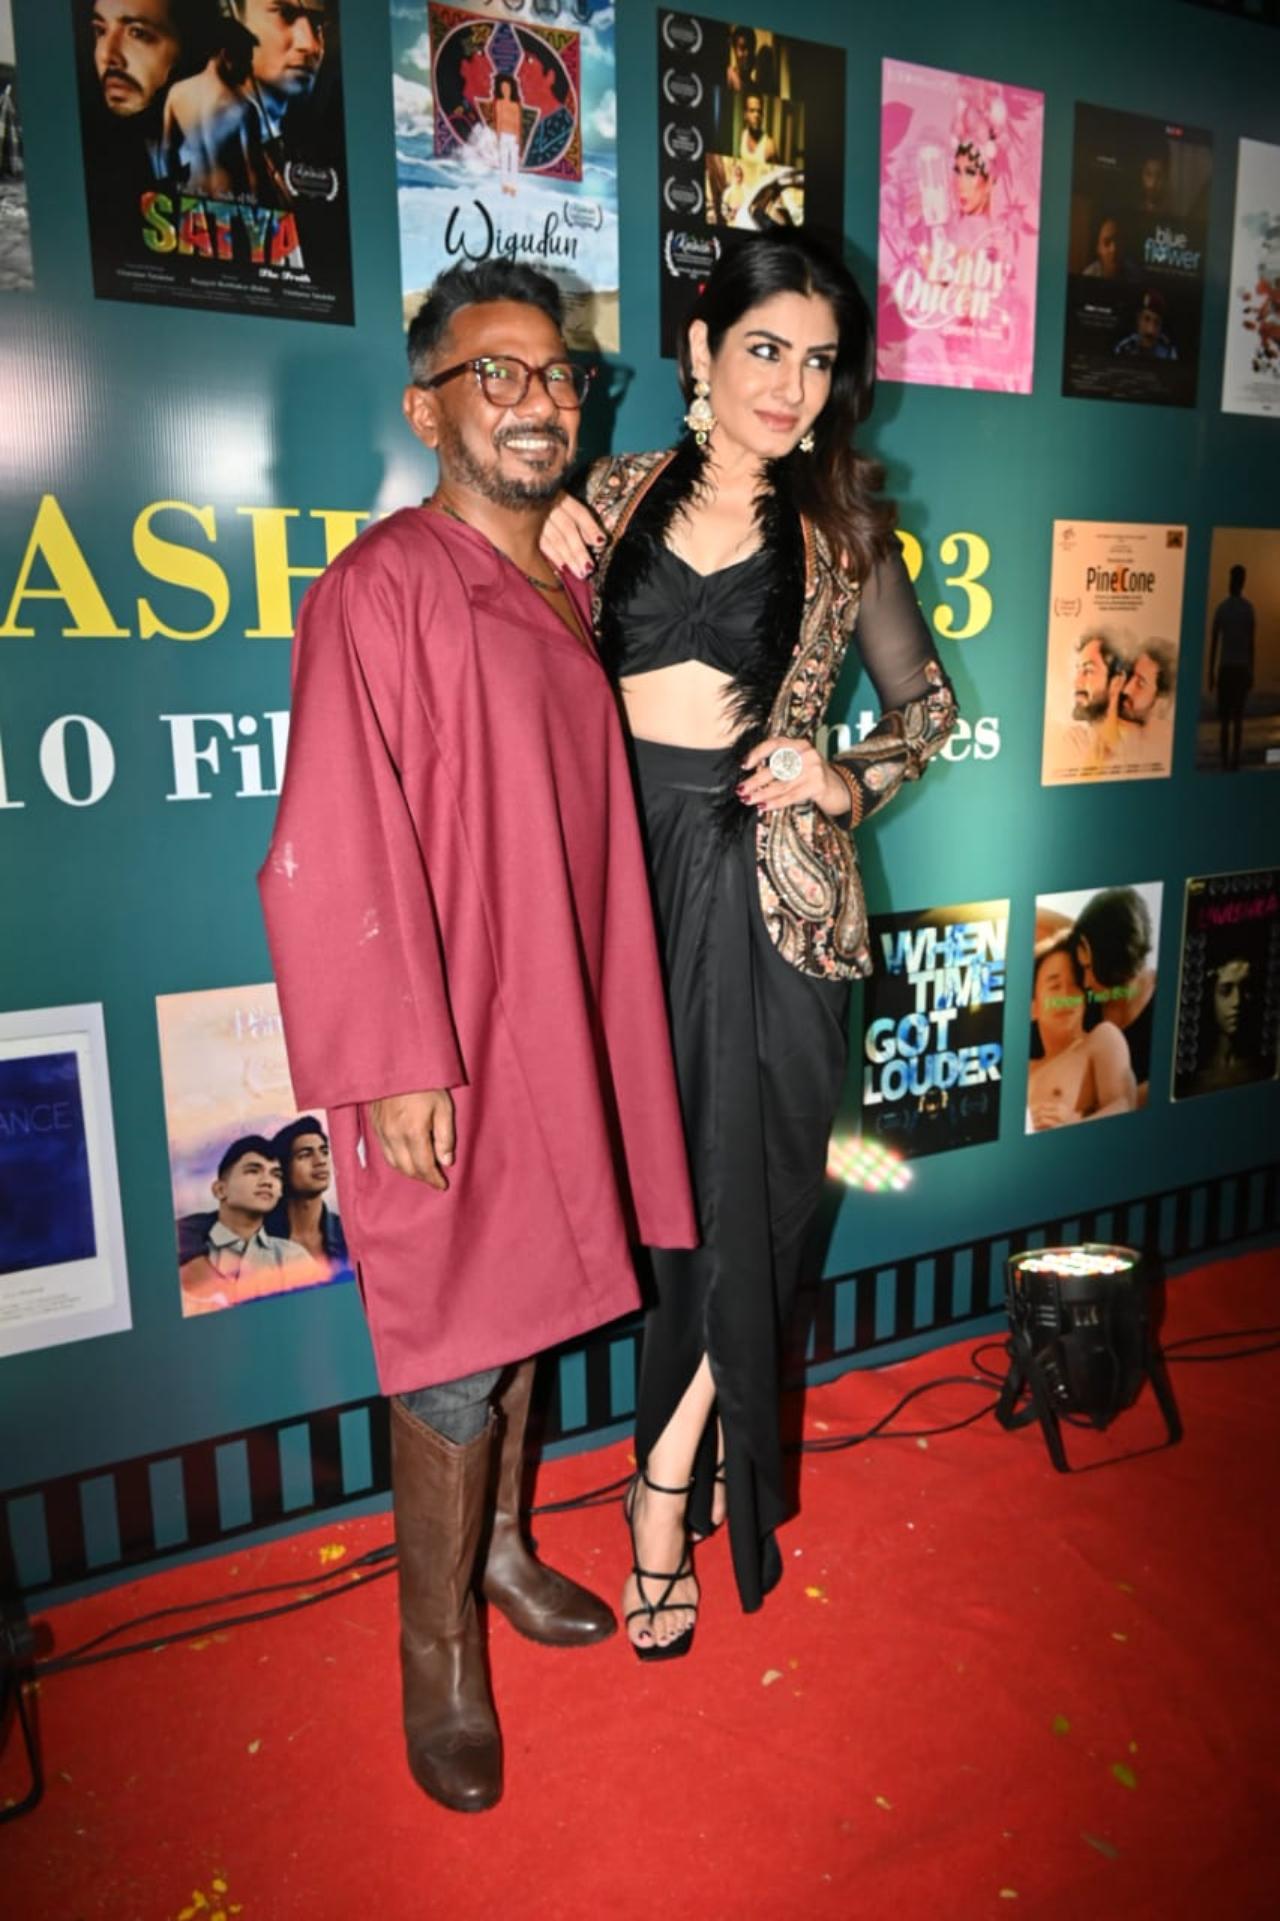 Raveena Tandon arrived at the festival to show her support. The actress looked stunning in a black and gold attired and posed with filmmaker Onir on the red carpet